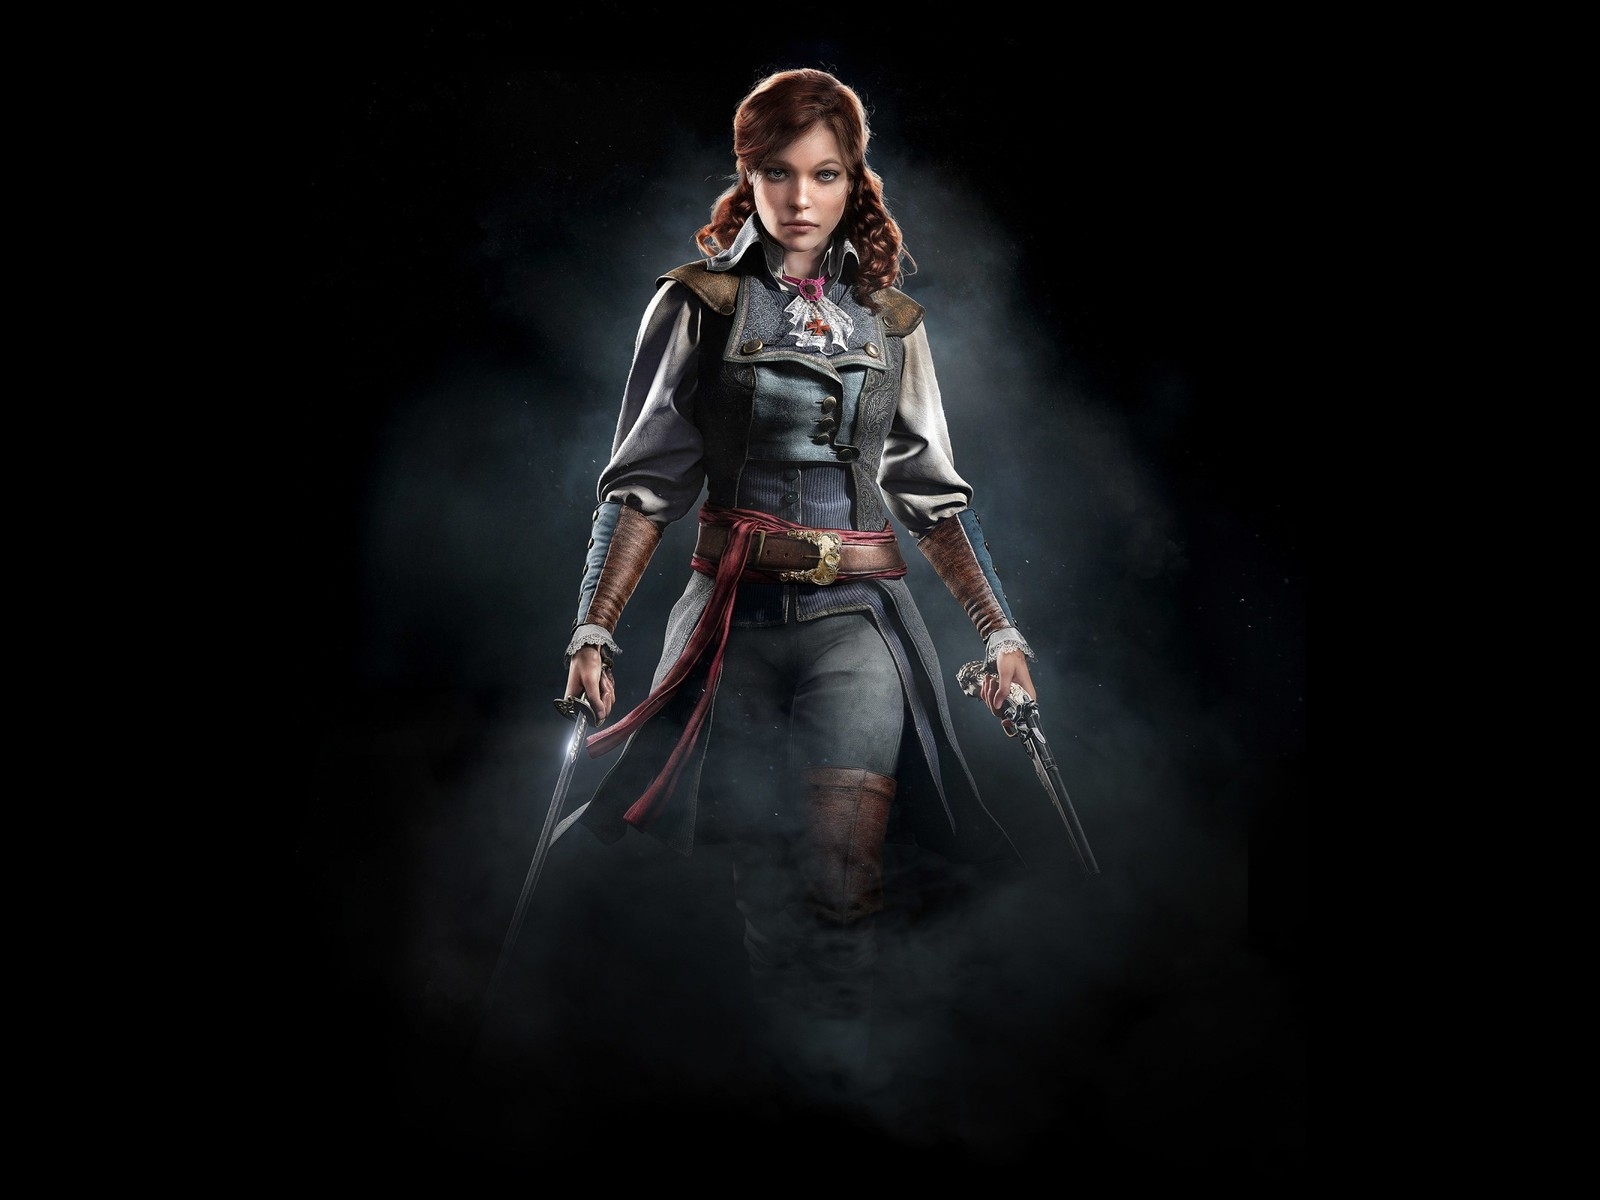 Elise Assassins Creed Unity  for 1600 x 1200 resolution